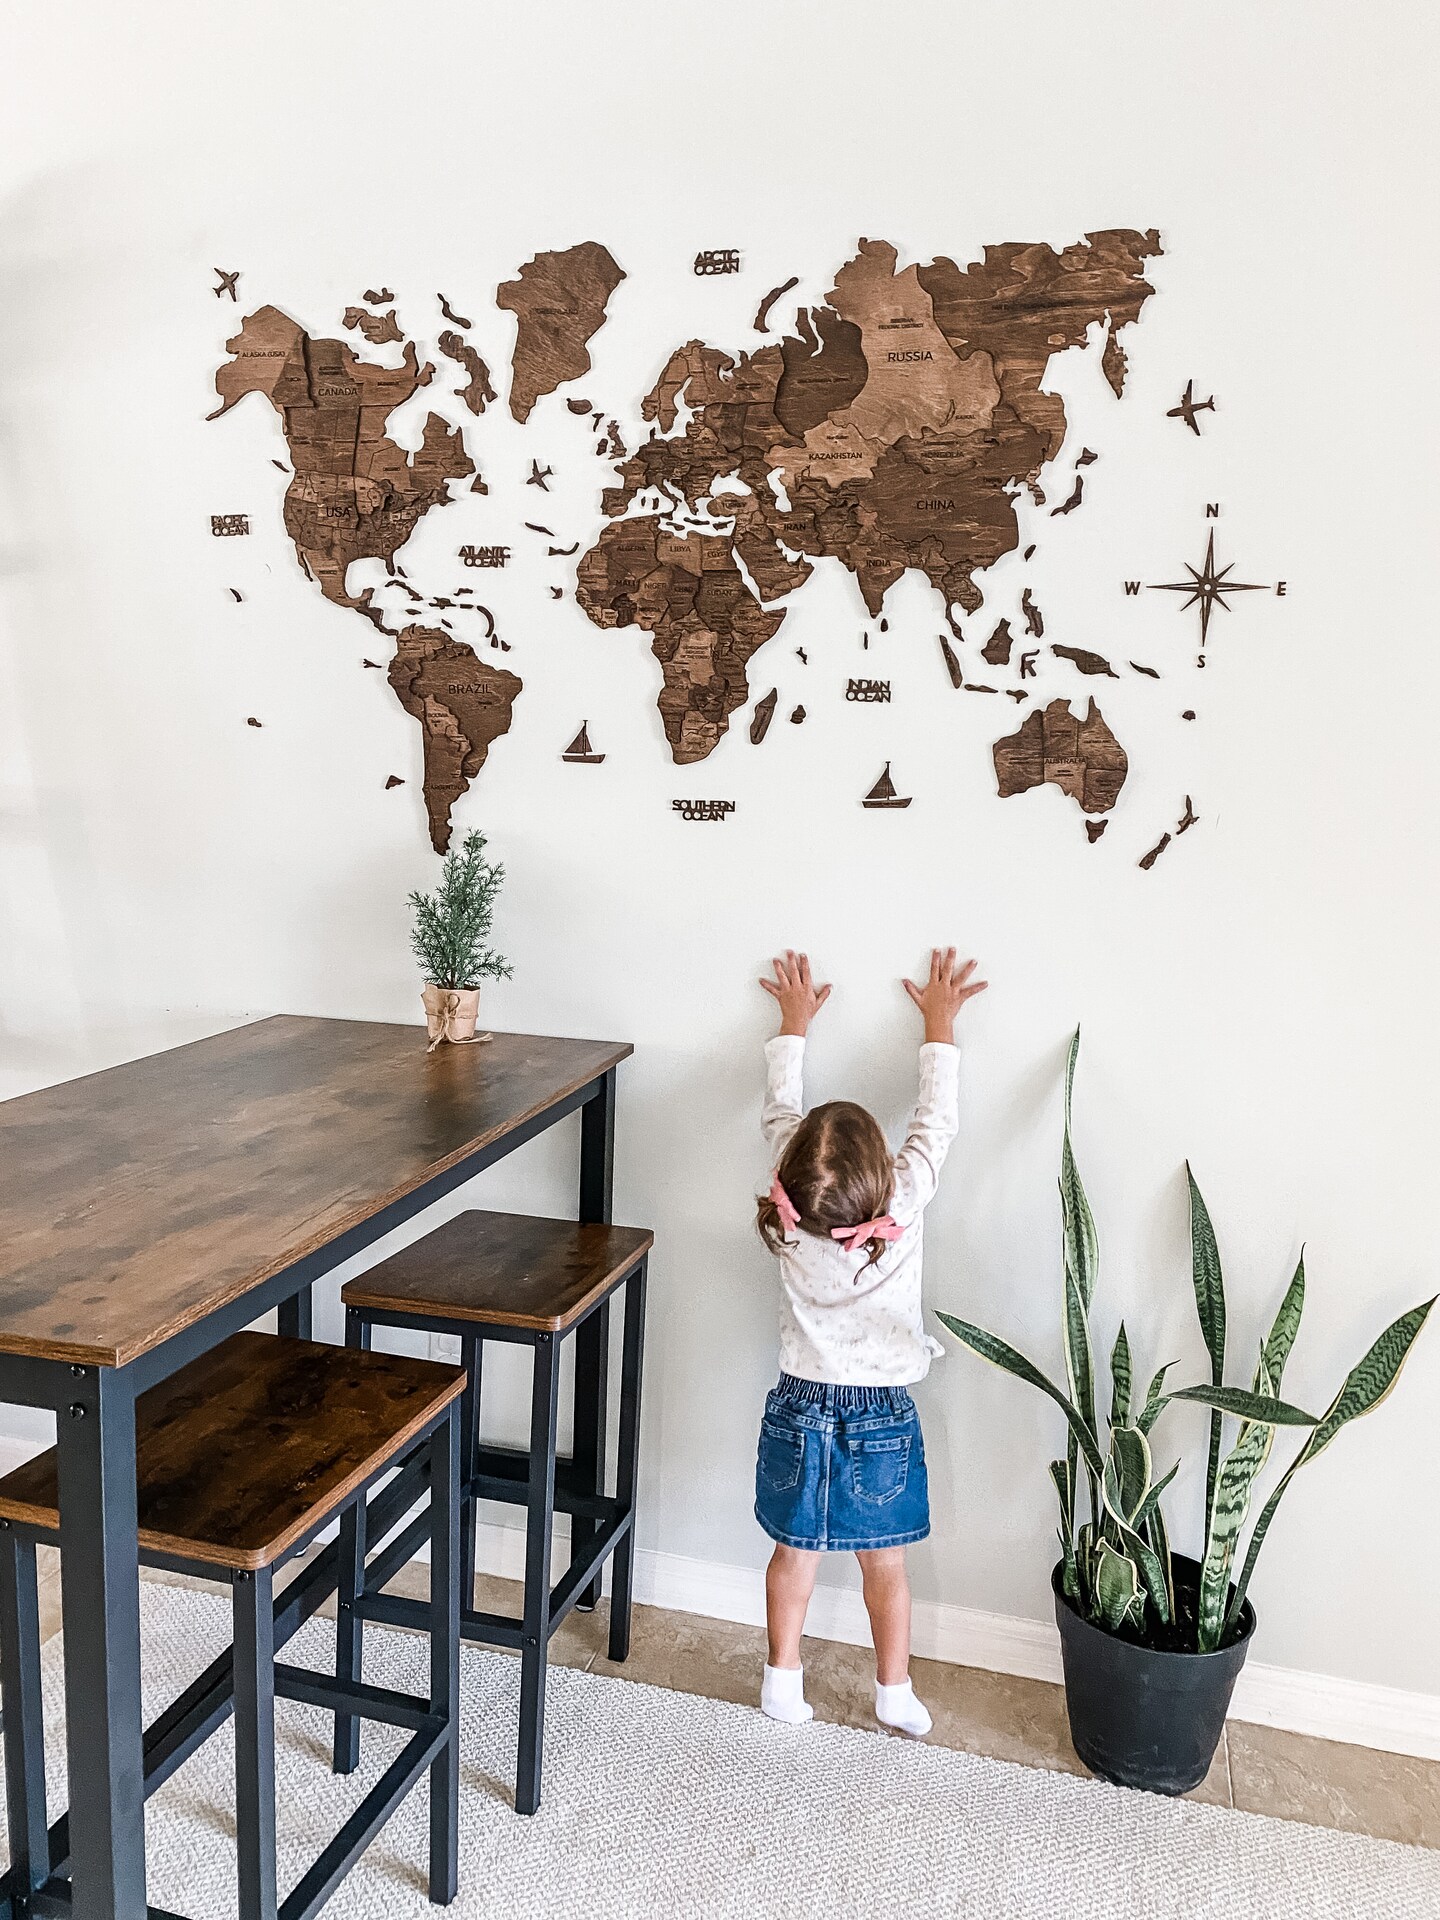 Wood World Map, Wooden Wall Decor, Home Decor, Travels Gift, Home Decor